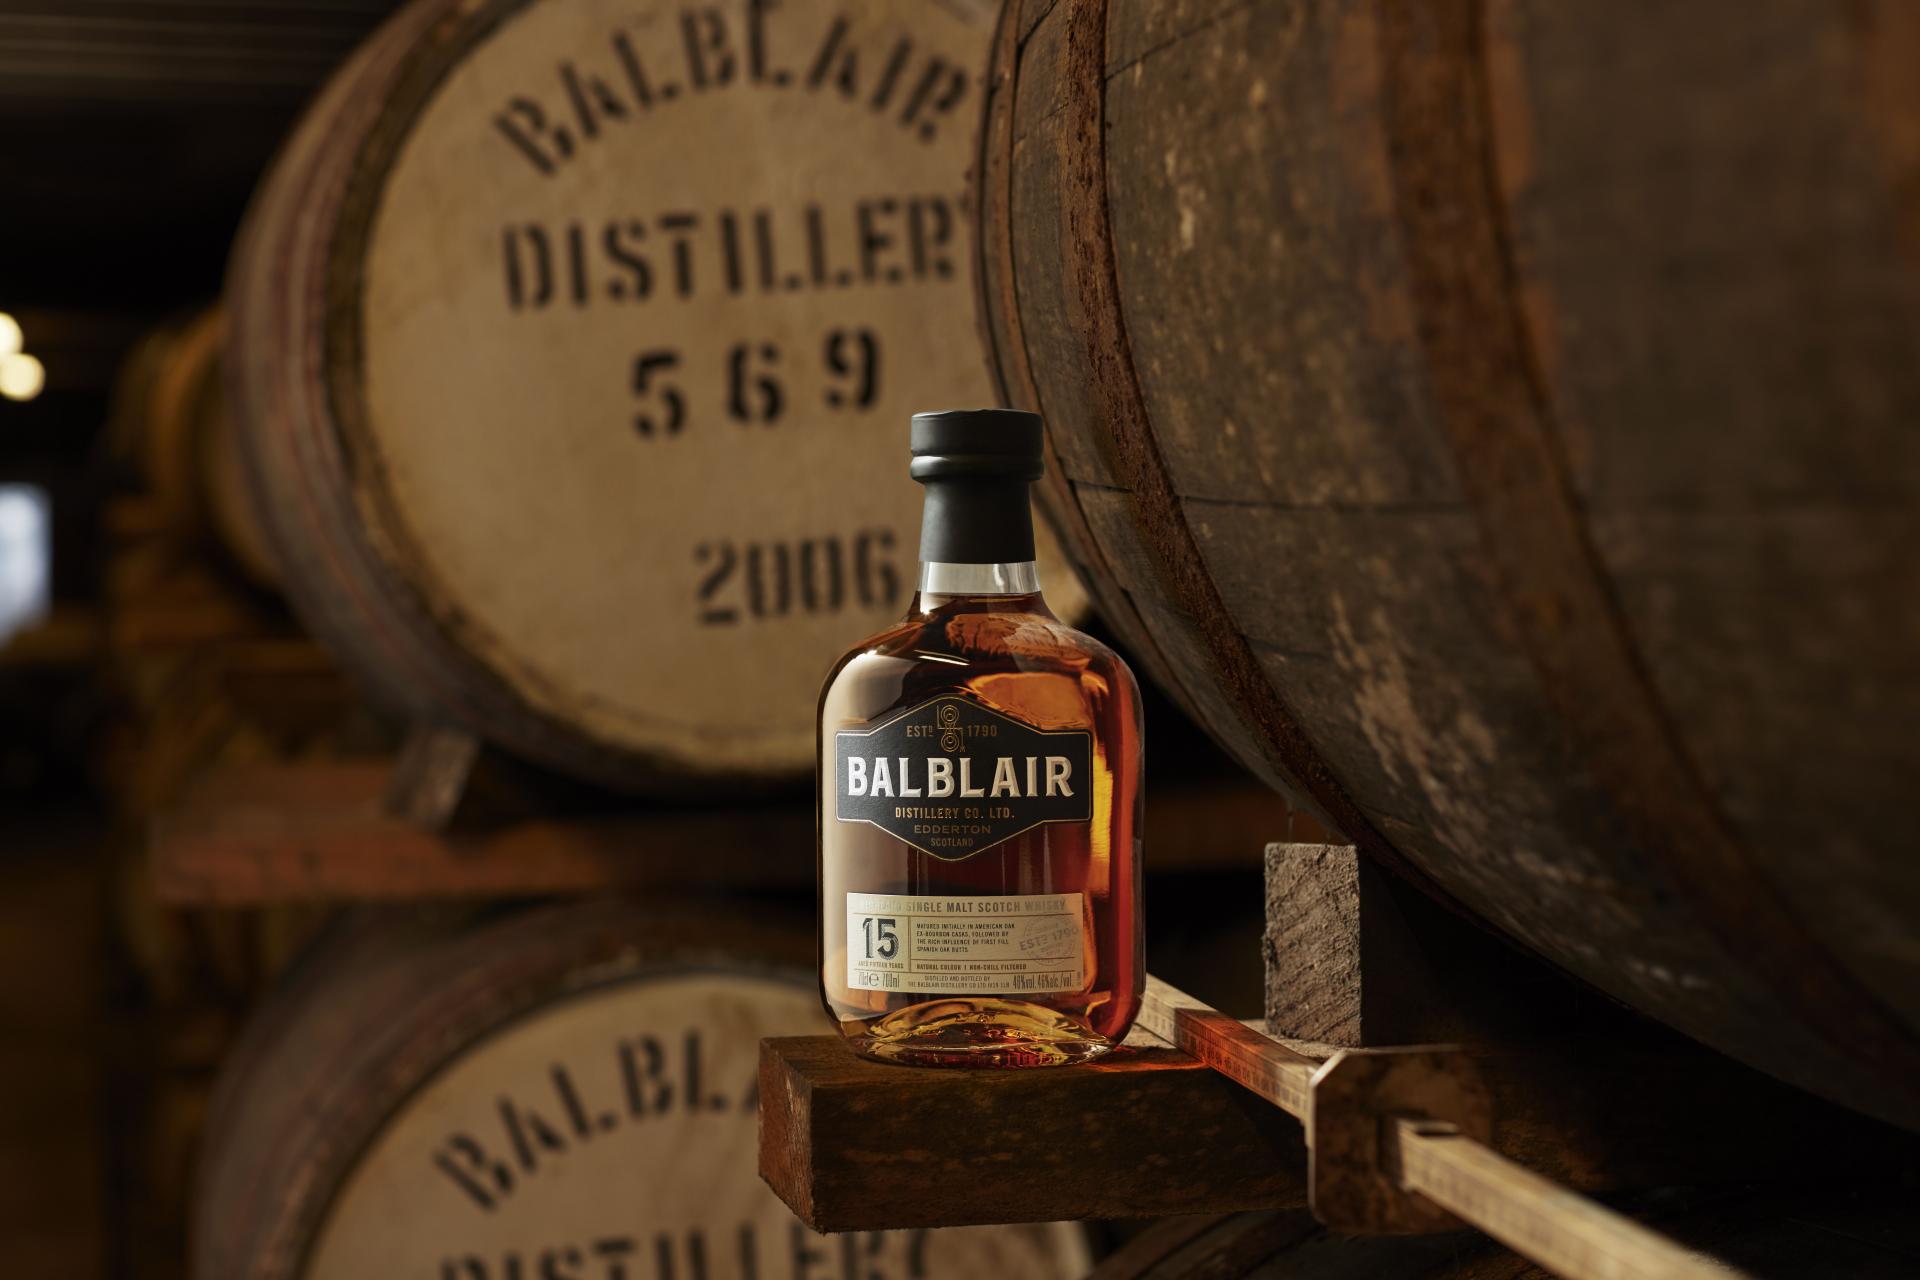 Balblair 15, pictured at the distillery